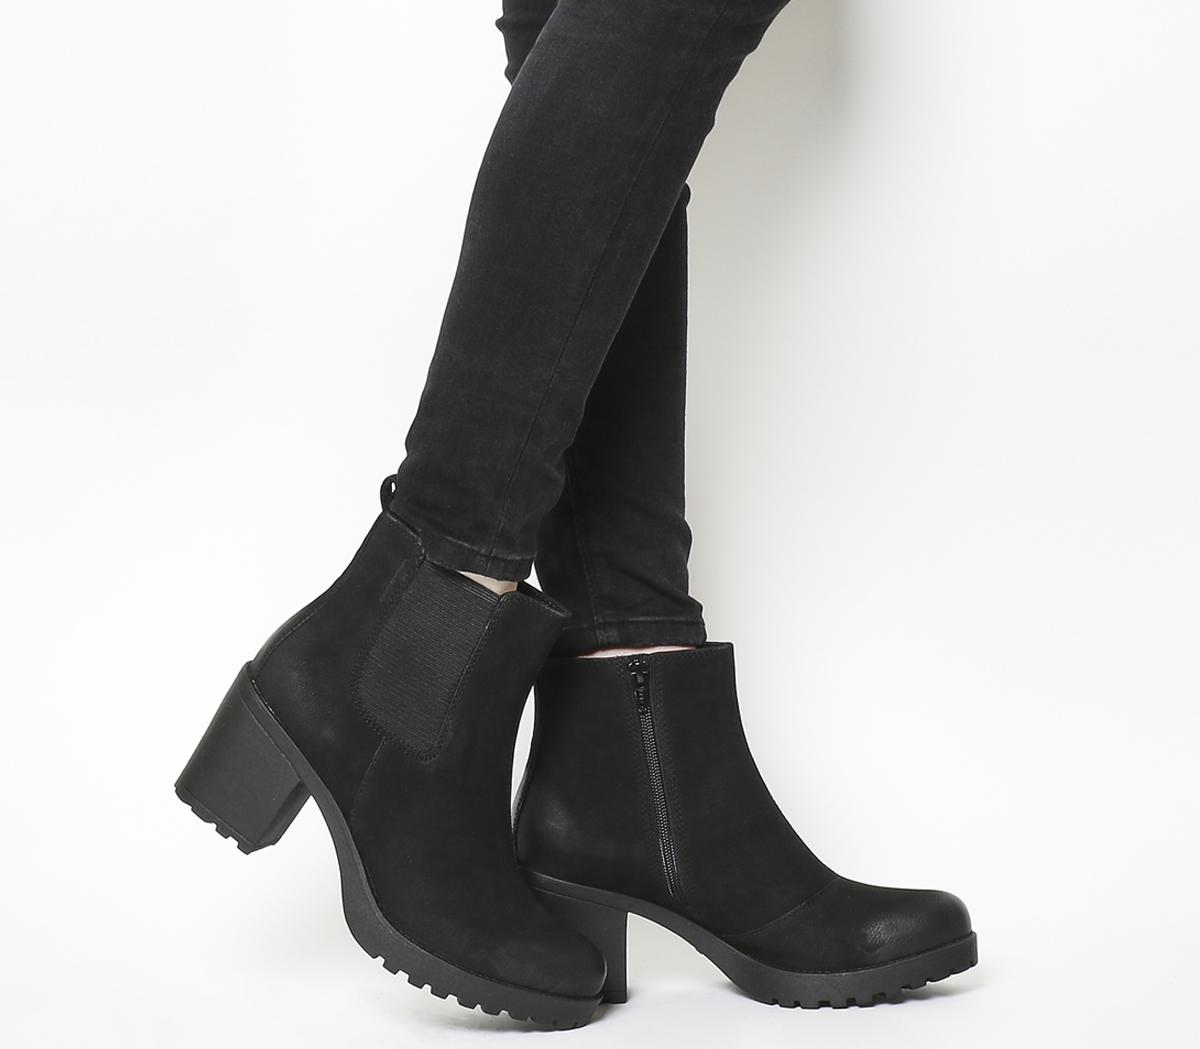 Vagabond Leather Grace Heeled Chelsea Boots in Black - Lyst